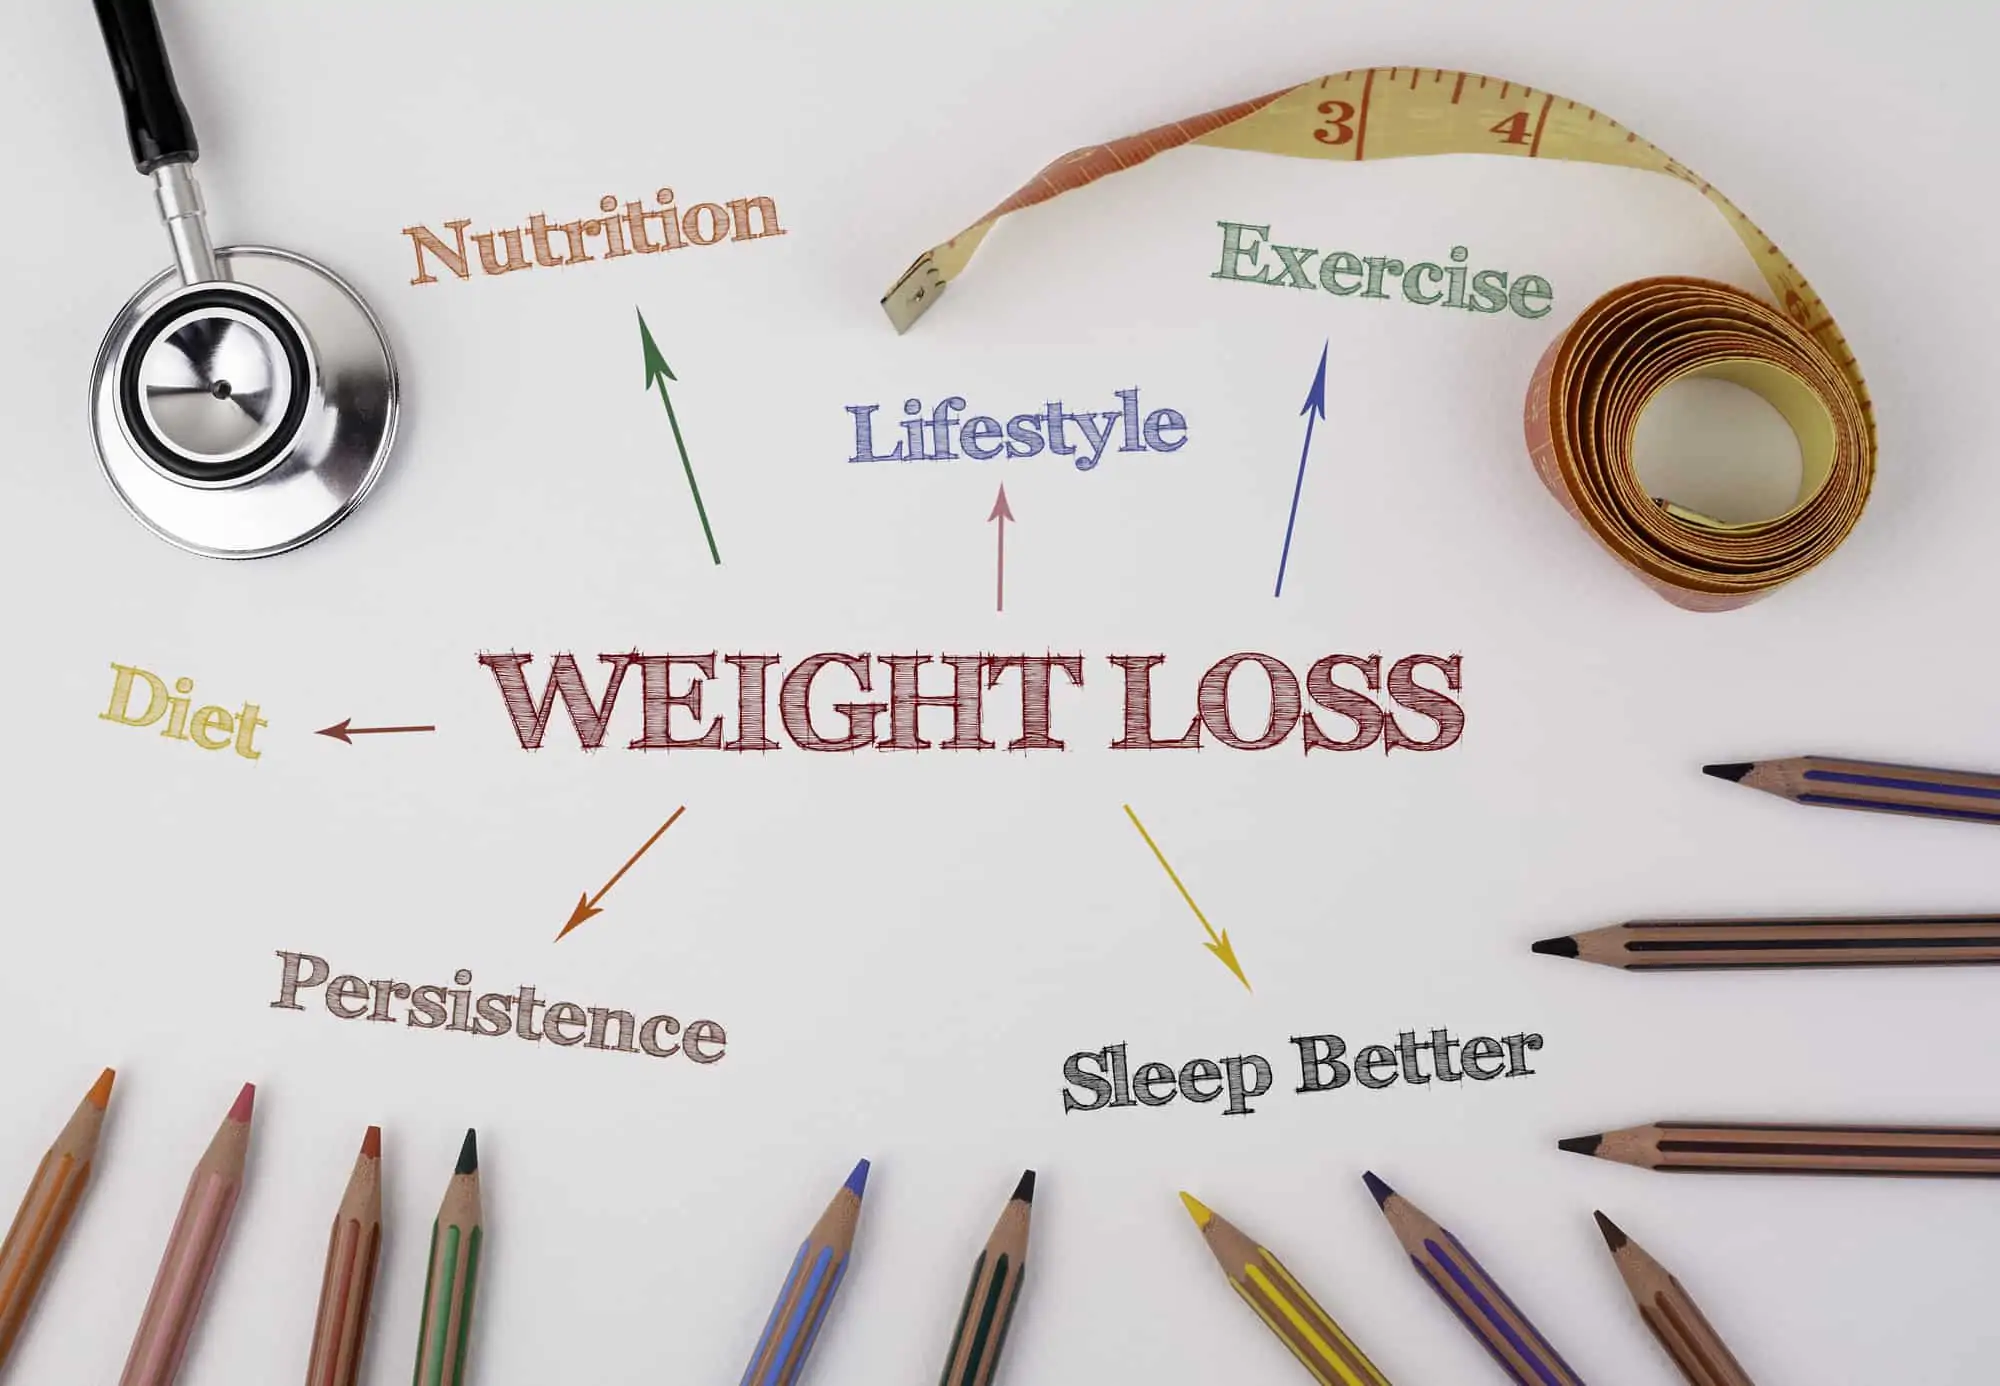 Medical Weight Loss Program in Hudson Can Be More Helpful Than Trying It Yourself